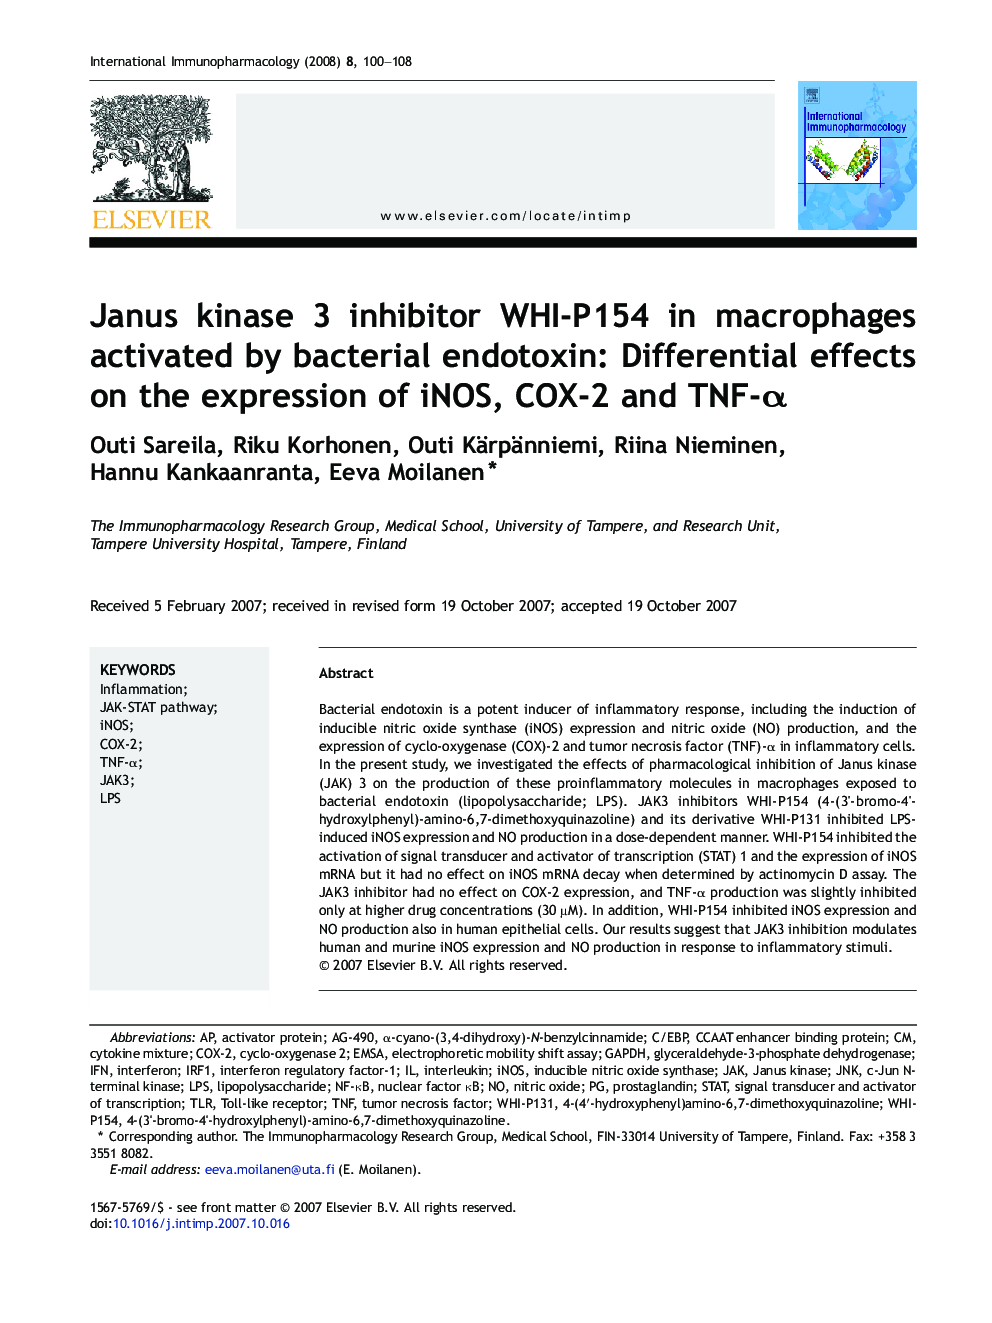 Janus kinase 3 inhibitor WHI-P154 in macrophages activated by bacterial endotoxin: Differential effects on the expression of iNOS, COX-2 and TNF-α